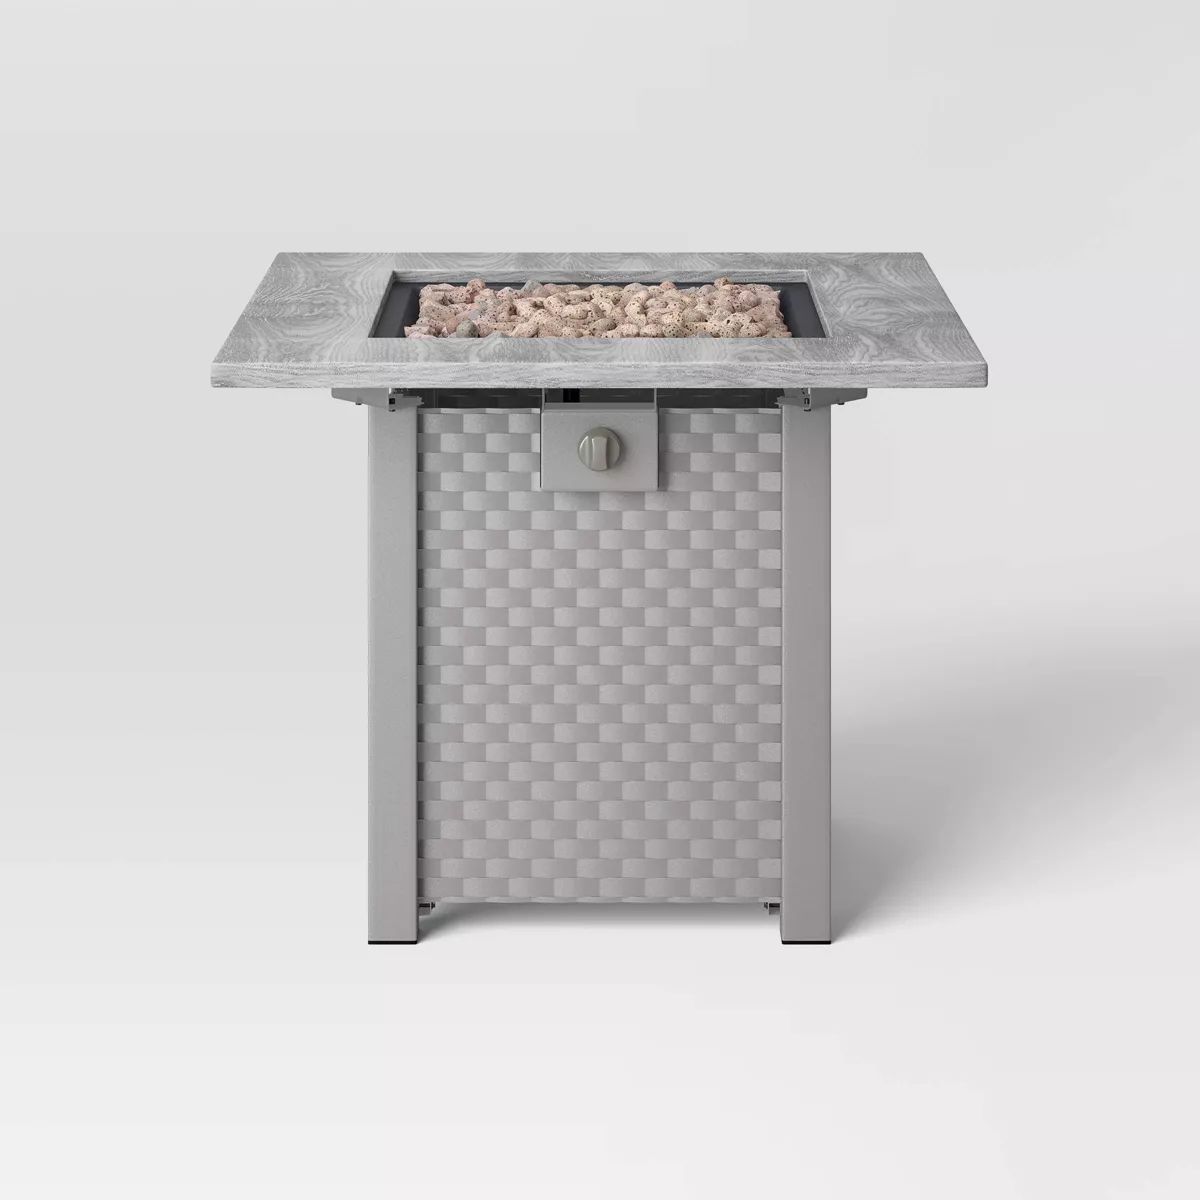 30" Square Stamped Steel Wicker Outdoor Fire Pit - Threshold™ | Target